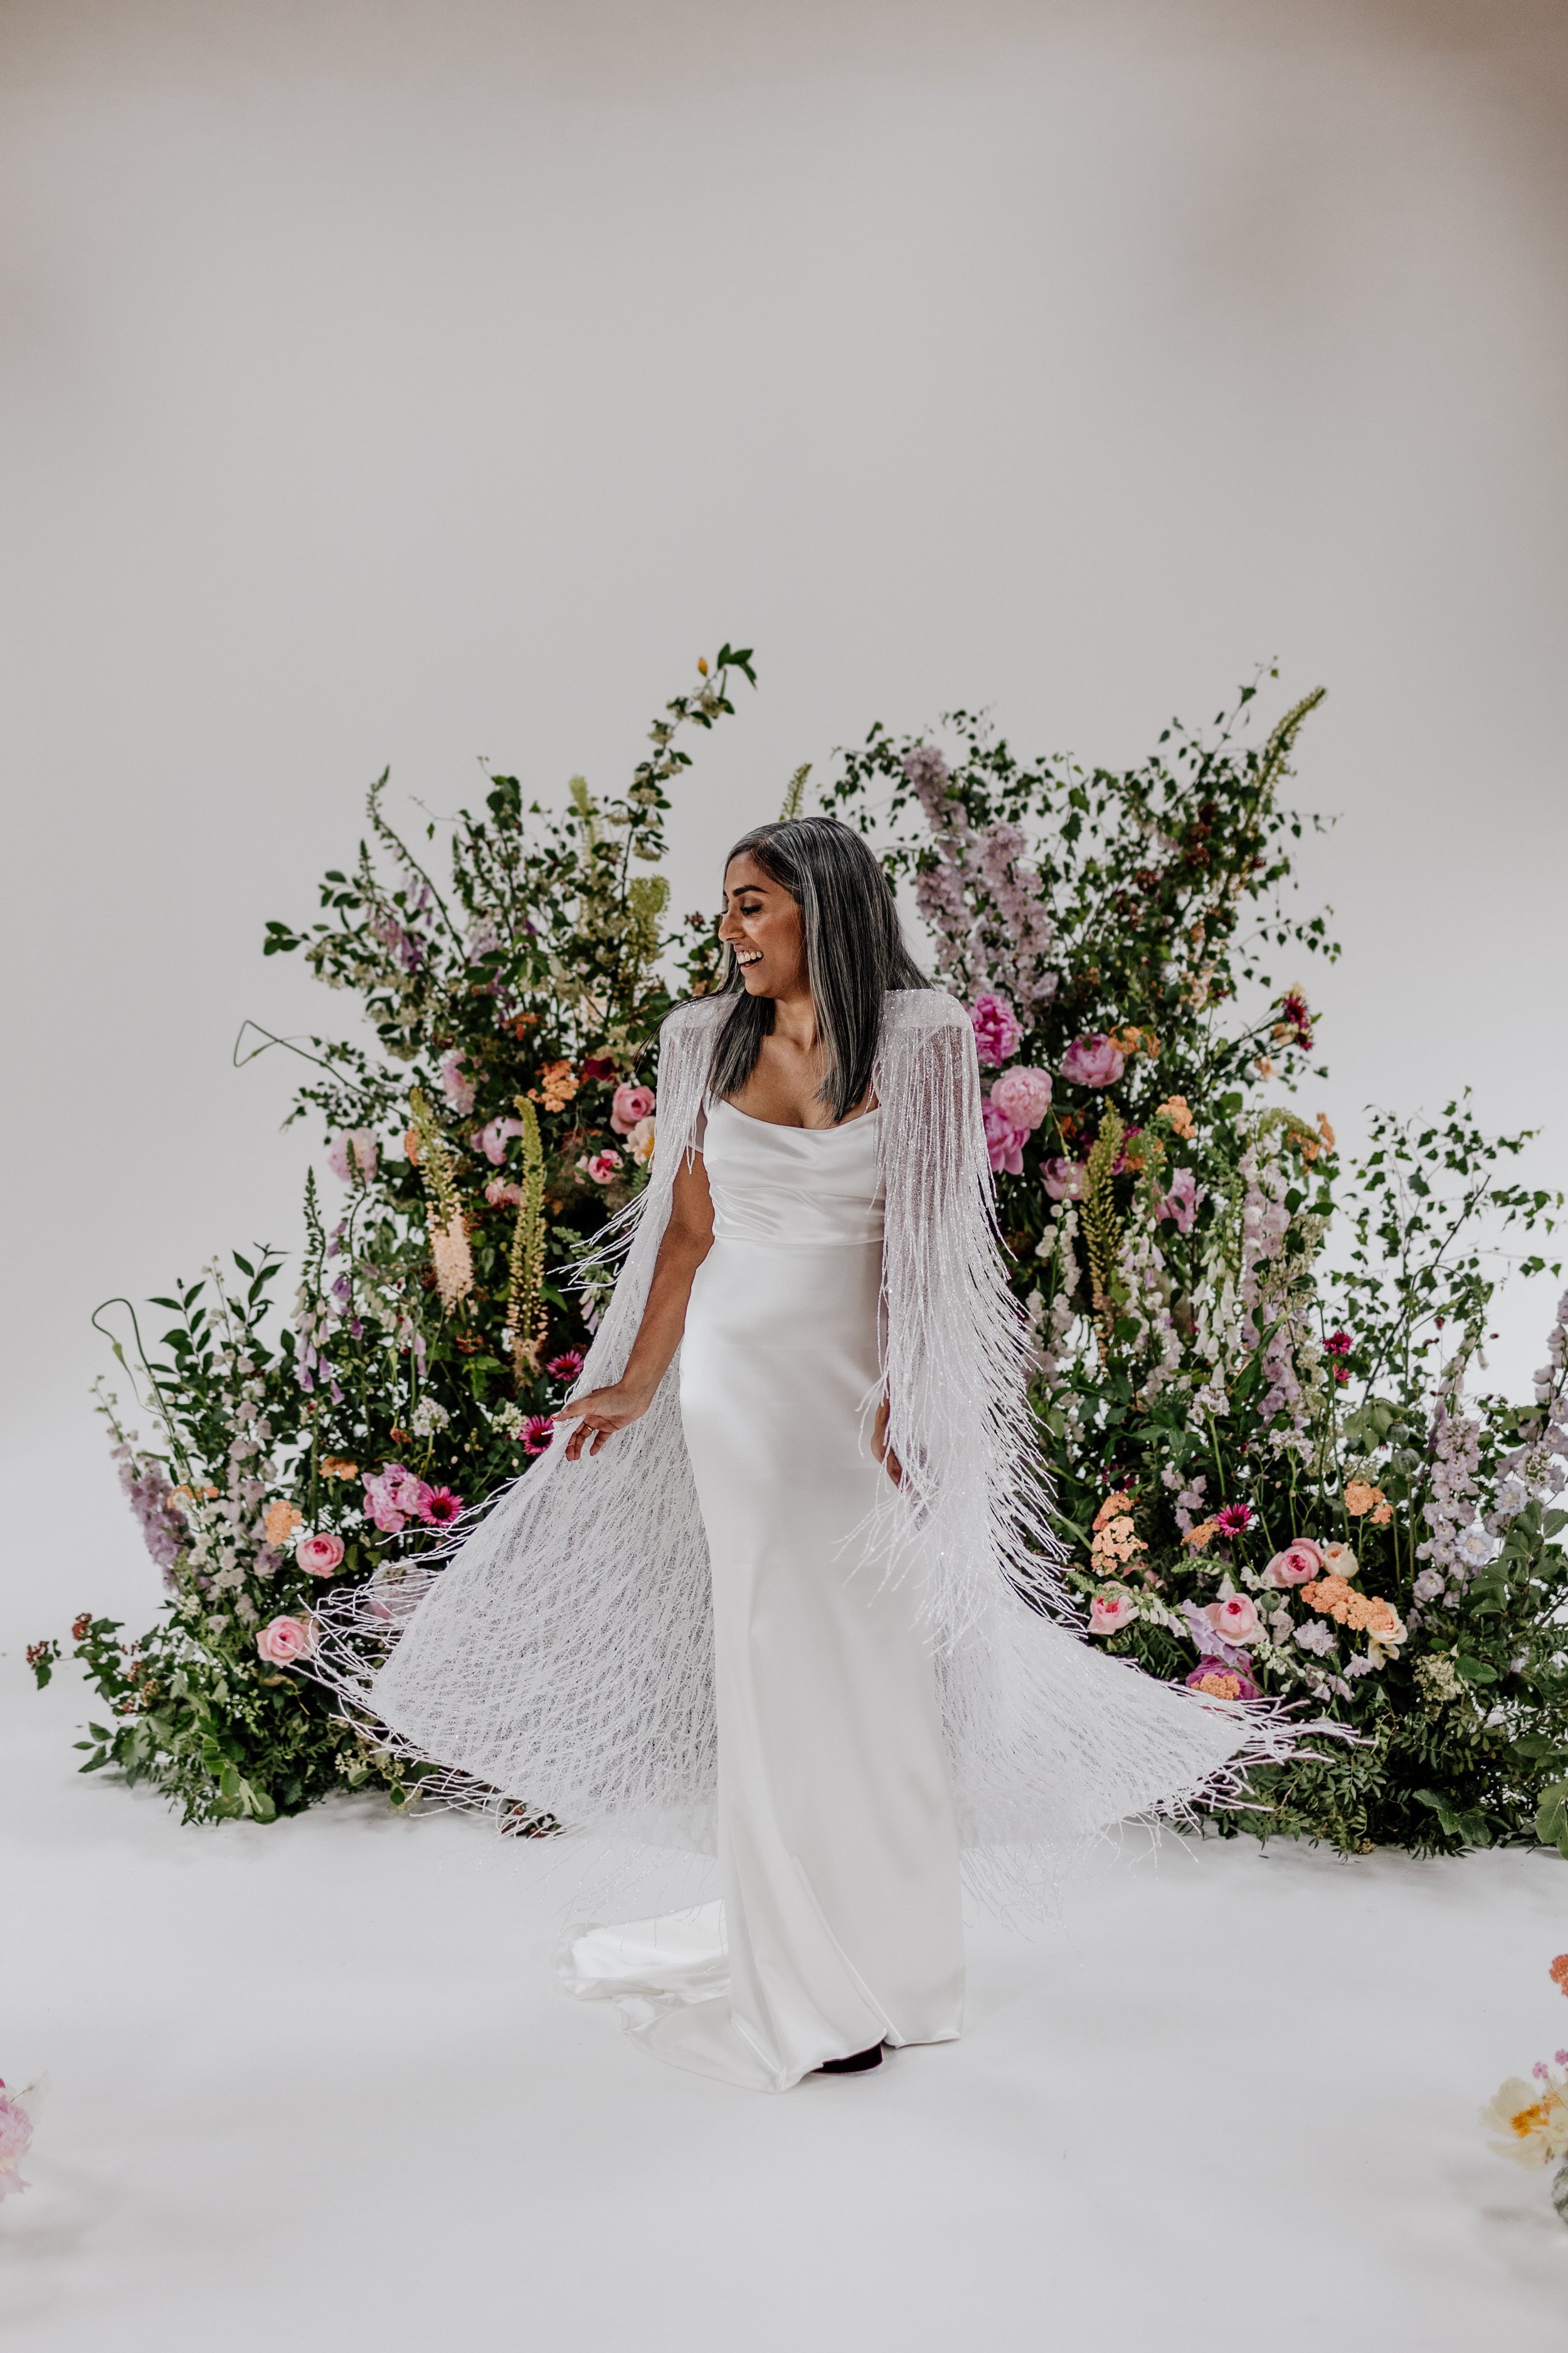 Beautiful bride Rebecca wore a wedding dress and beaded cape by Halfpenny London